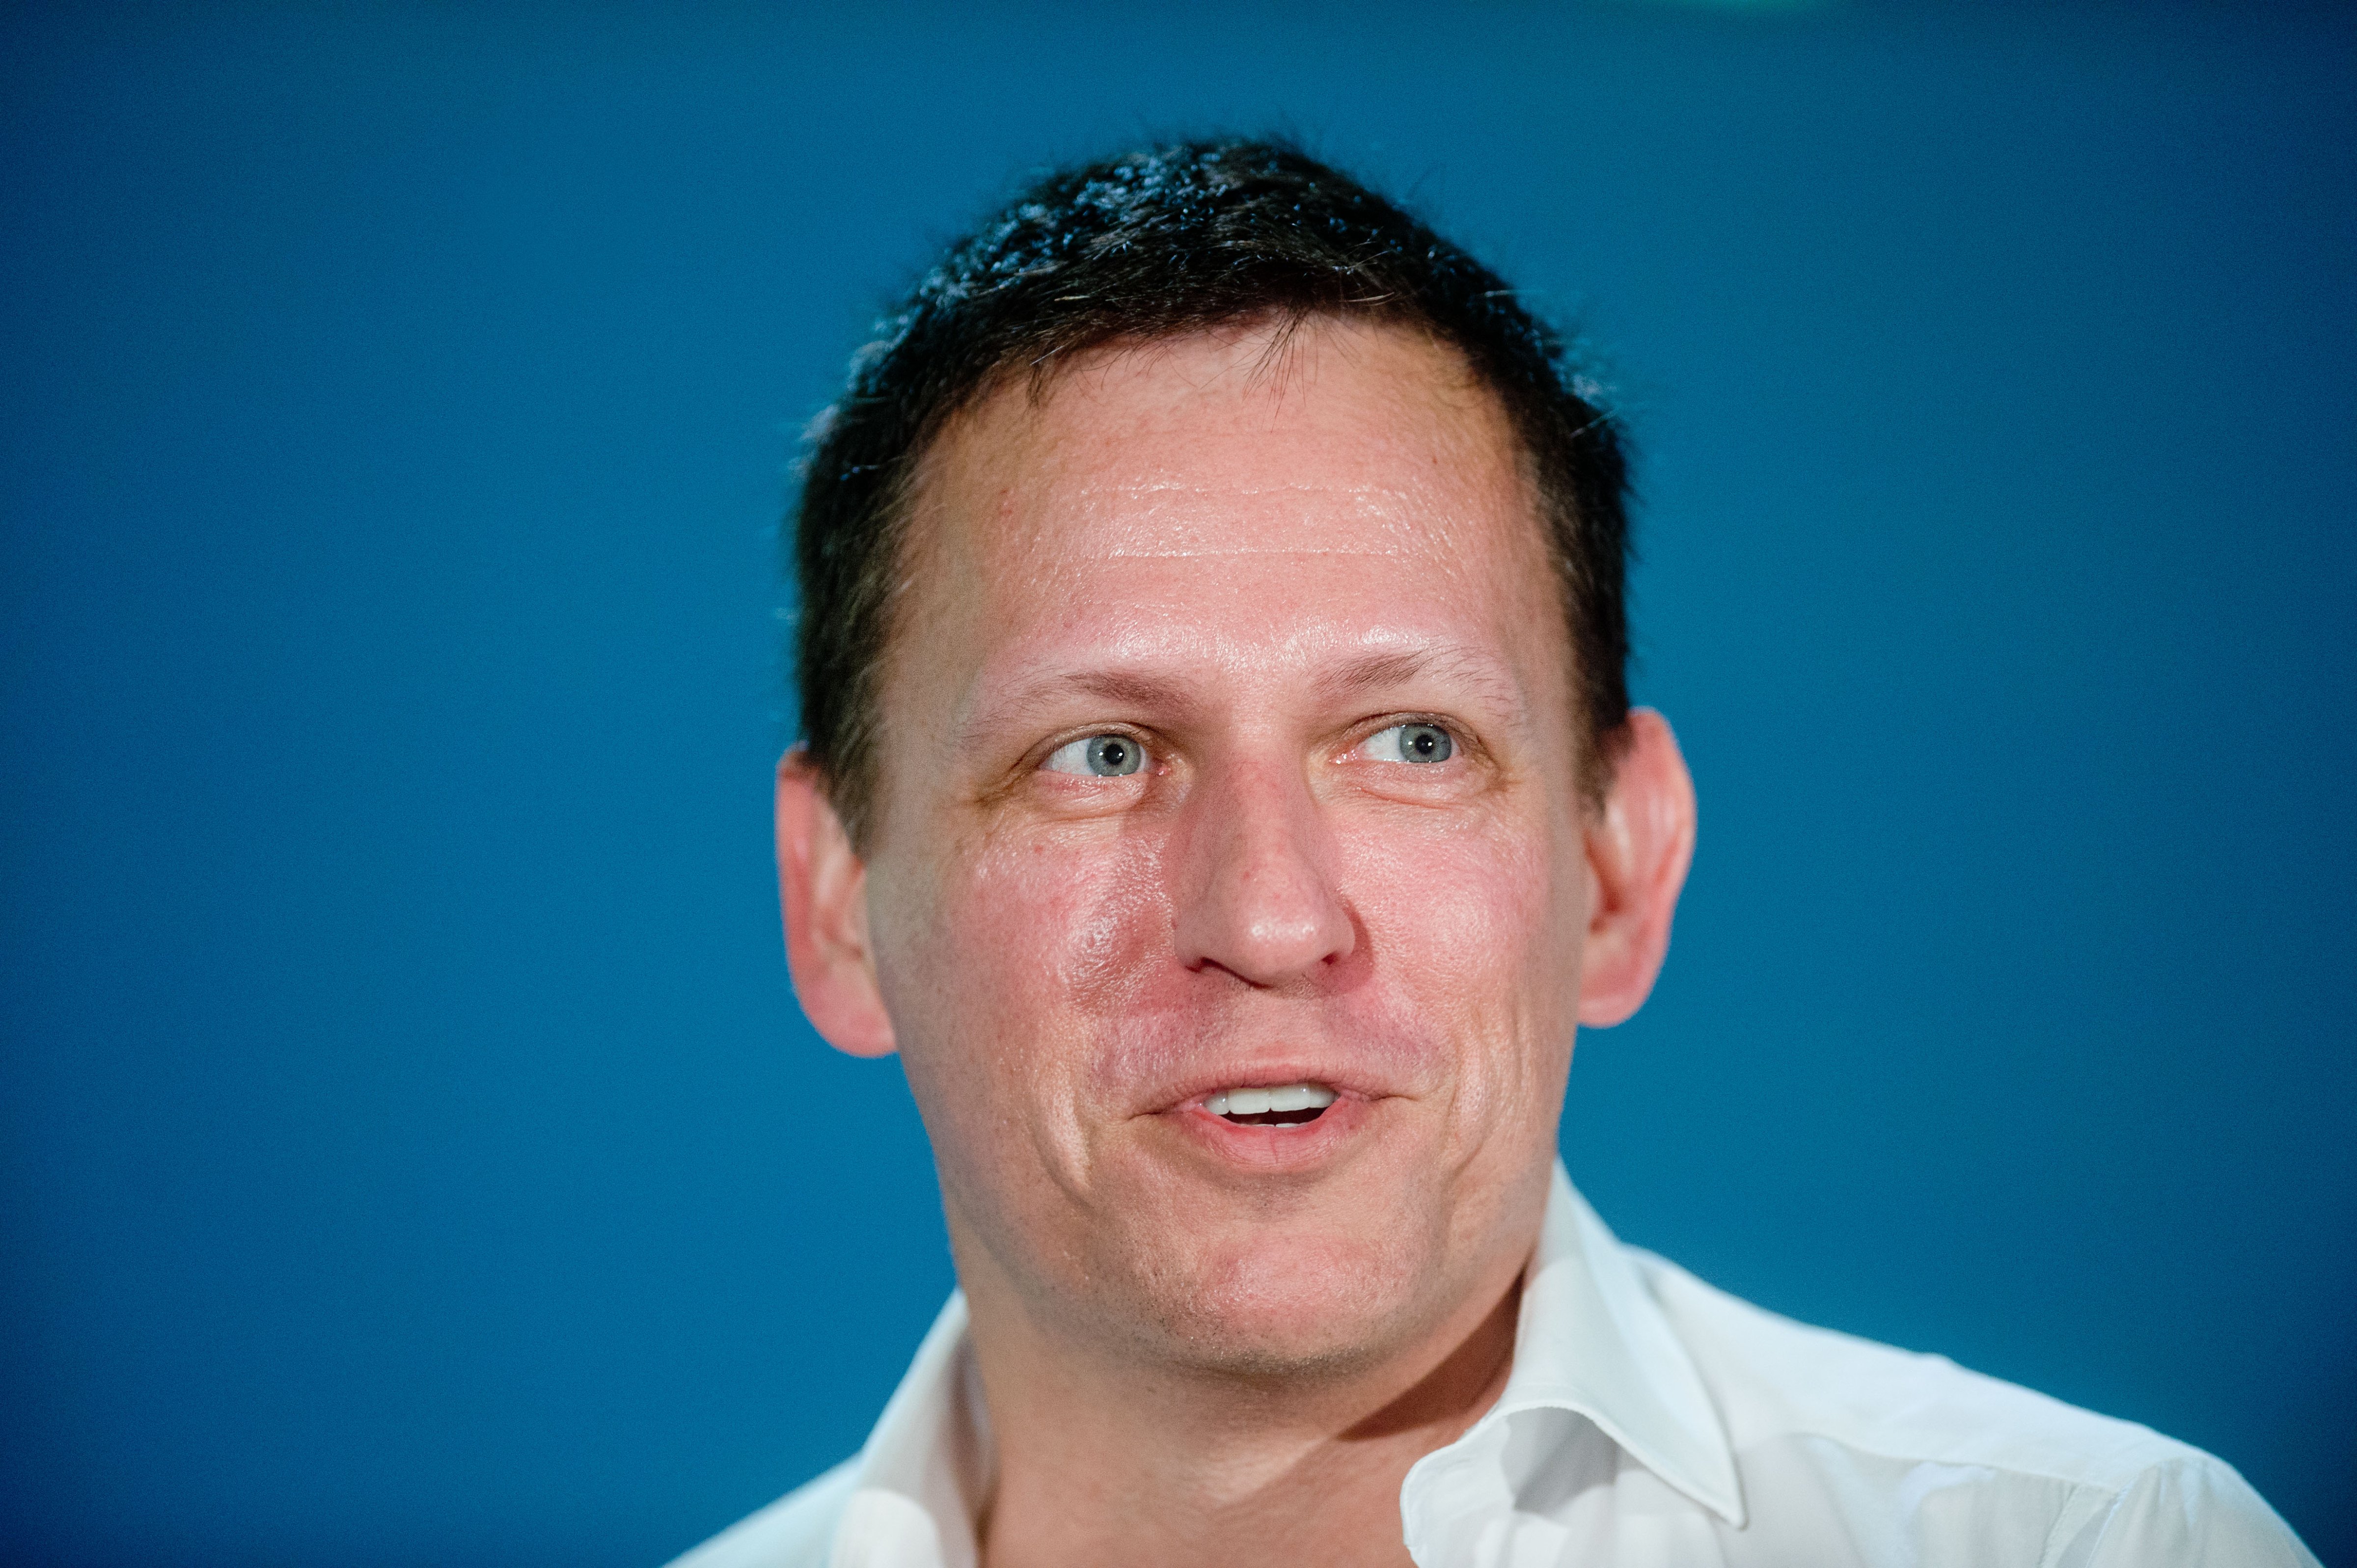 Peter Thiel, founding investor in PayPal Inc. and Facebook Inc., speaks during the LendIt USA 2016 conference in San Francisco, April 12, 2016. (Noah Berger—Bloomberg/Getty Images)